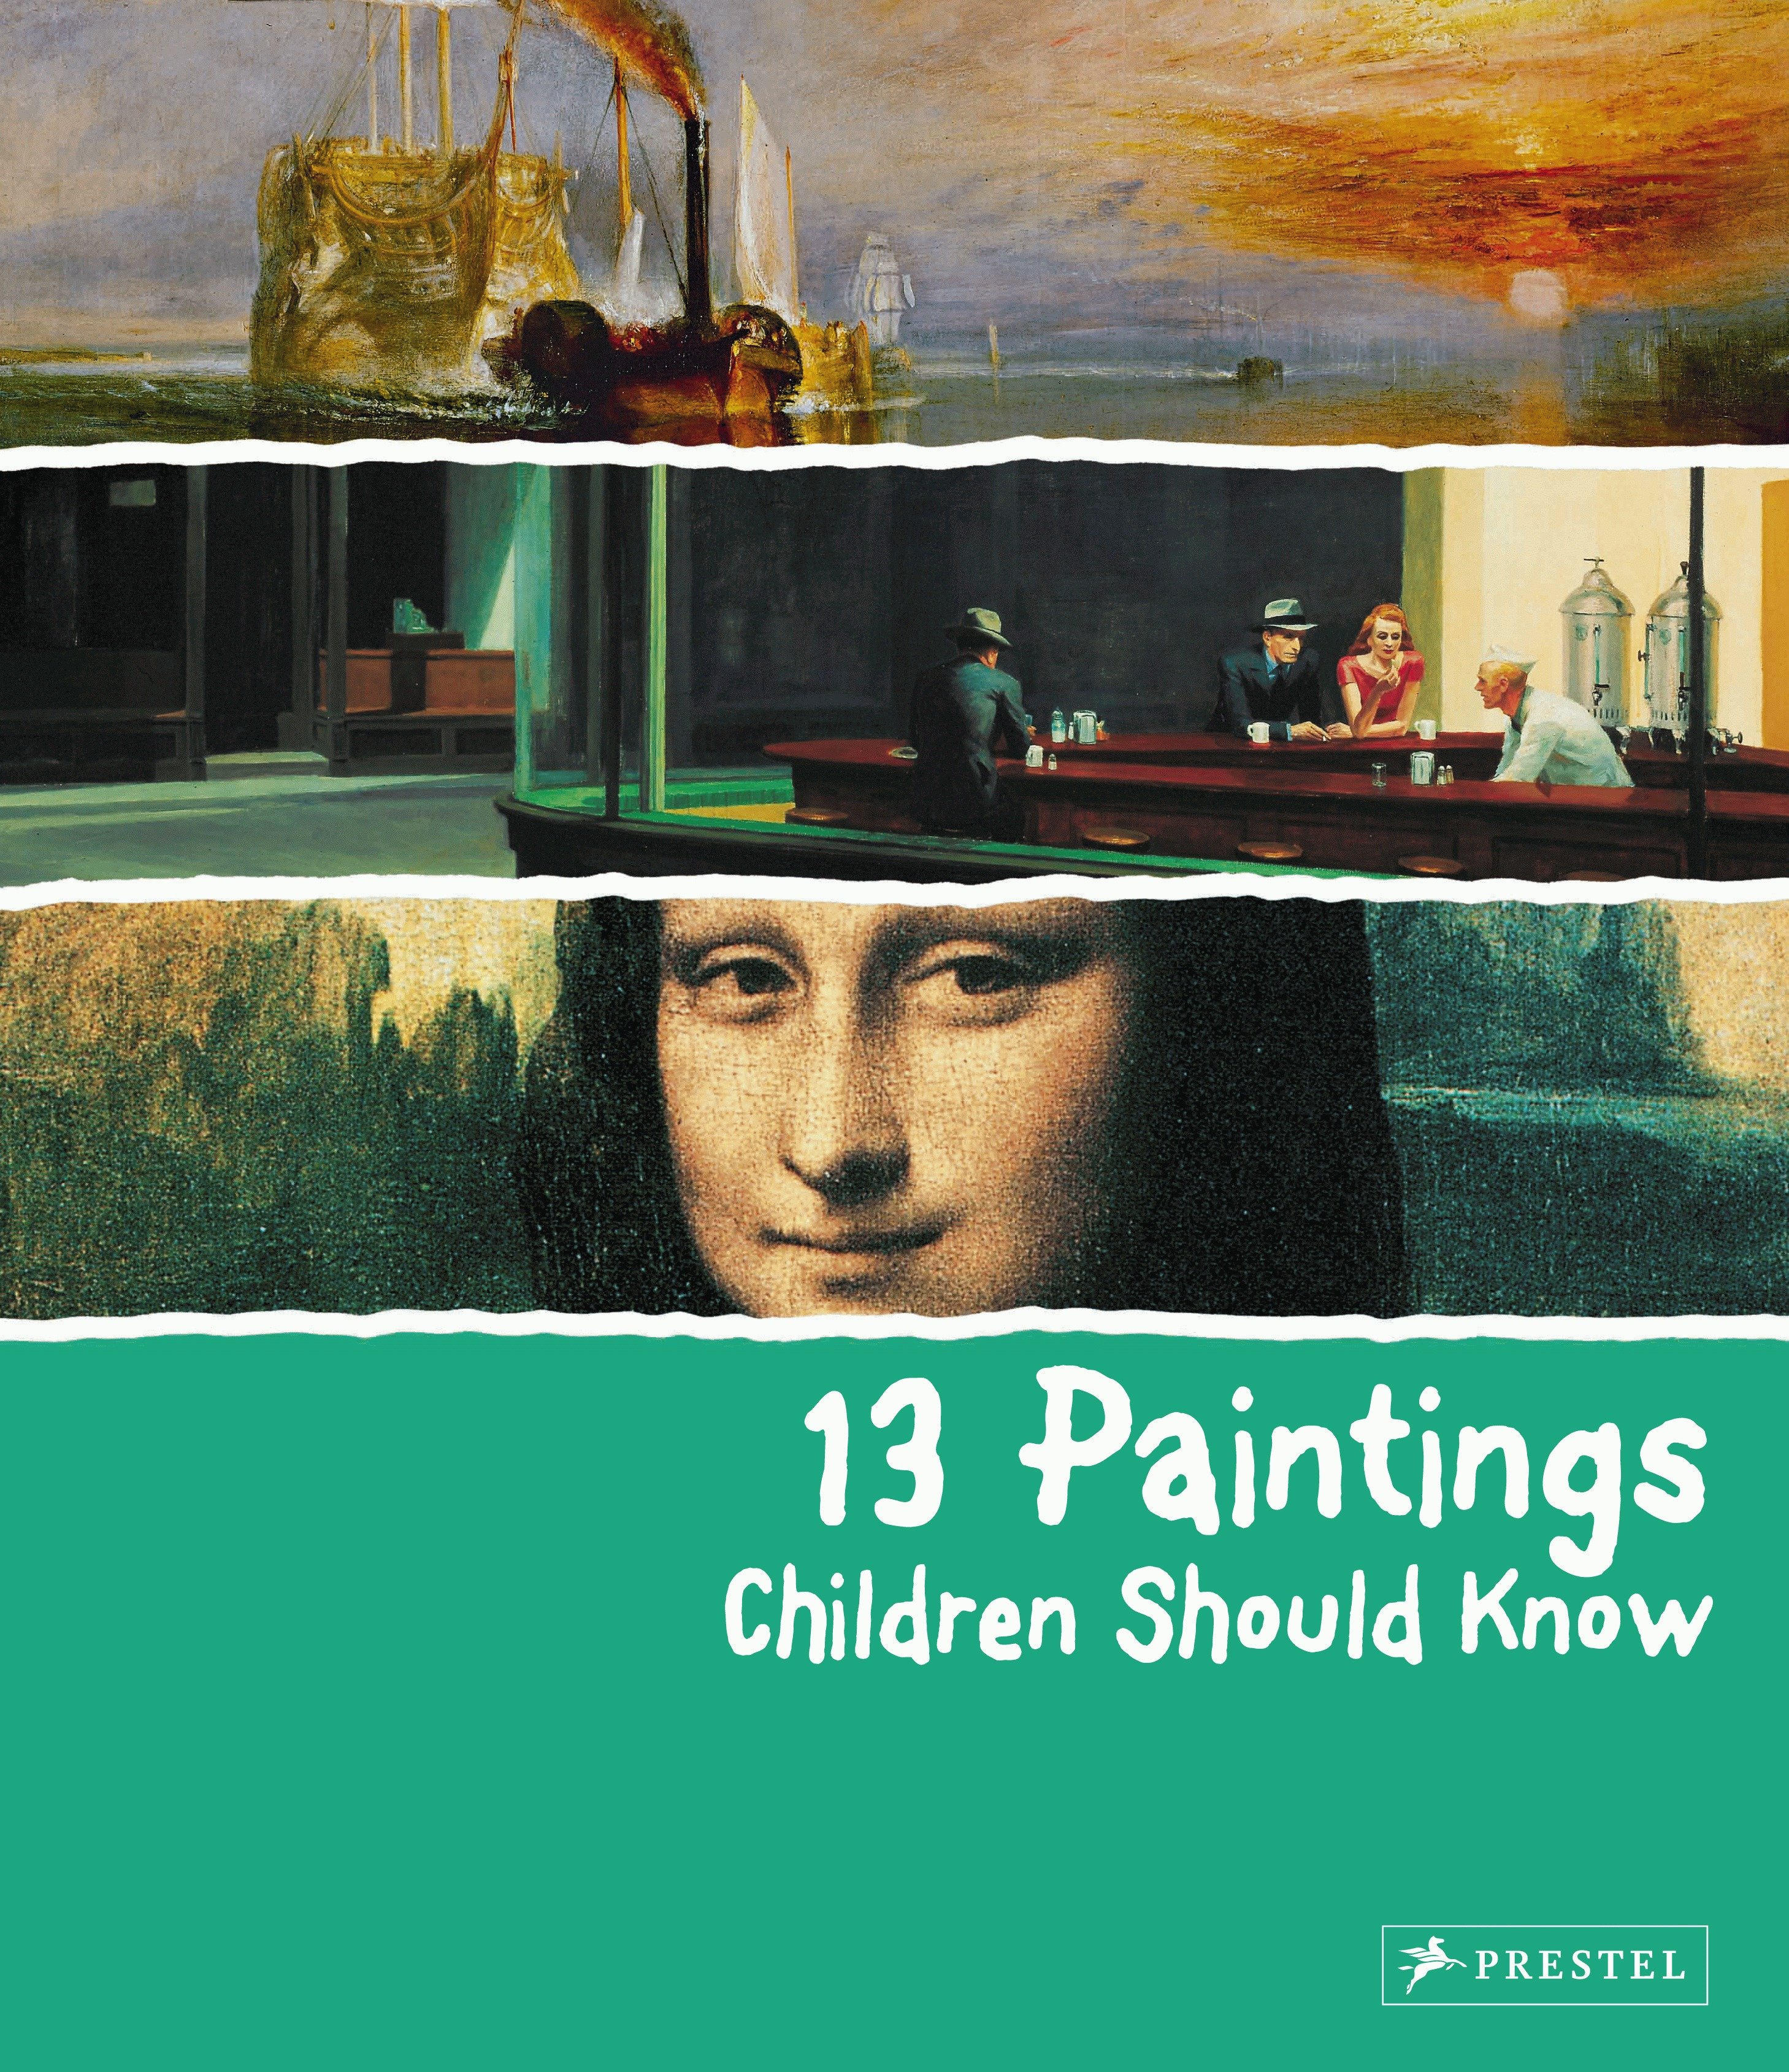 13 Paintings Children Should Know (Hardcover Book)